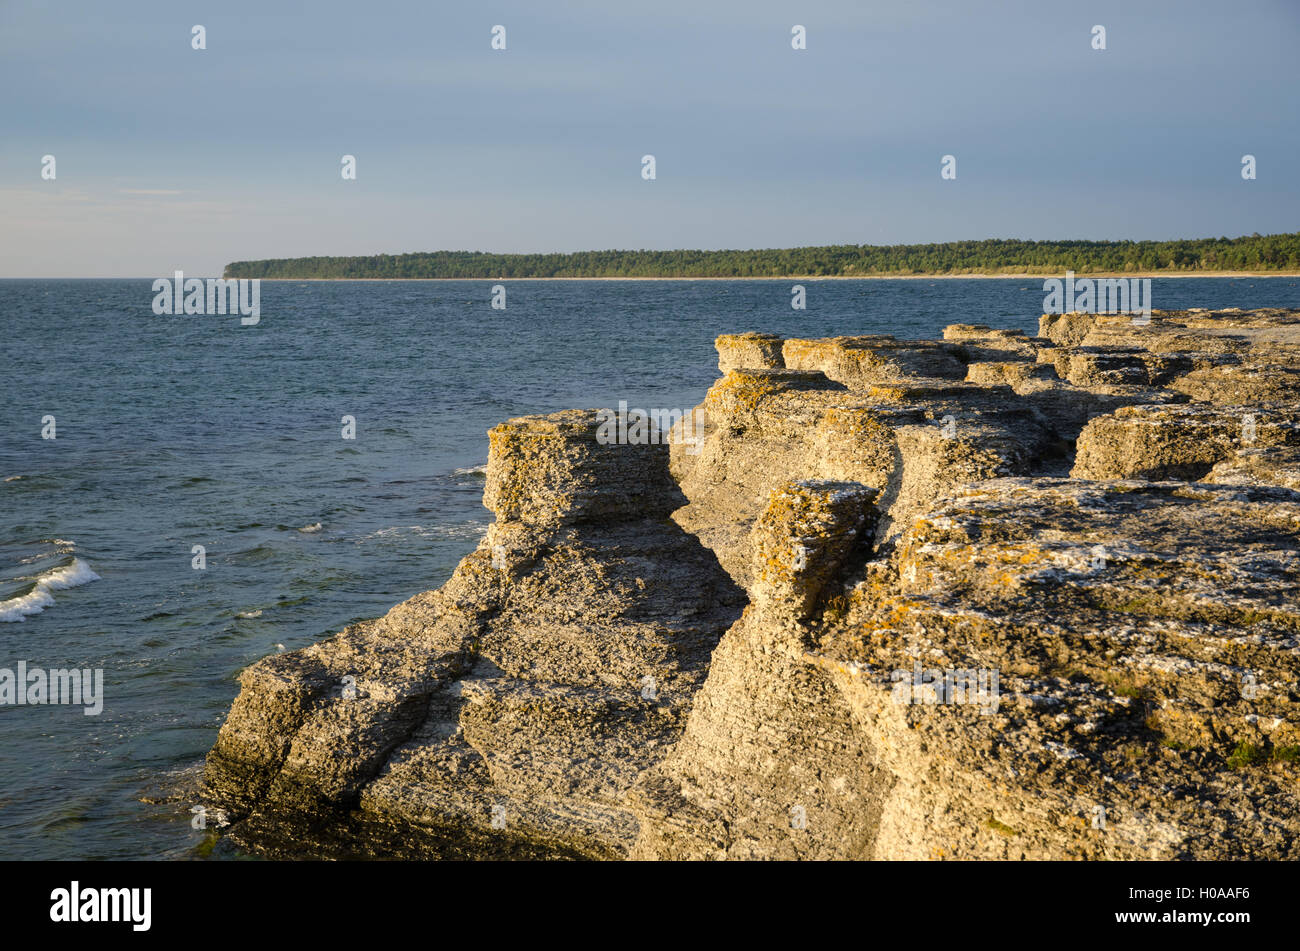 Eroded cliff formations by the coast of the swedish island Oland in the Baltic Sea Stock Photo